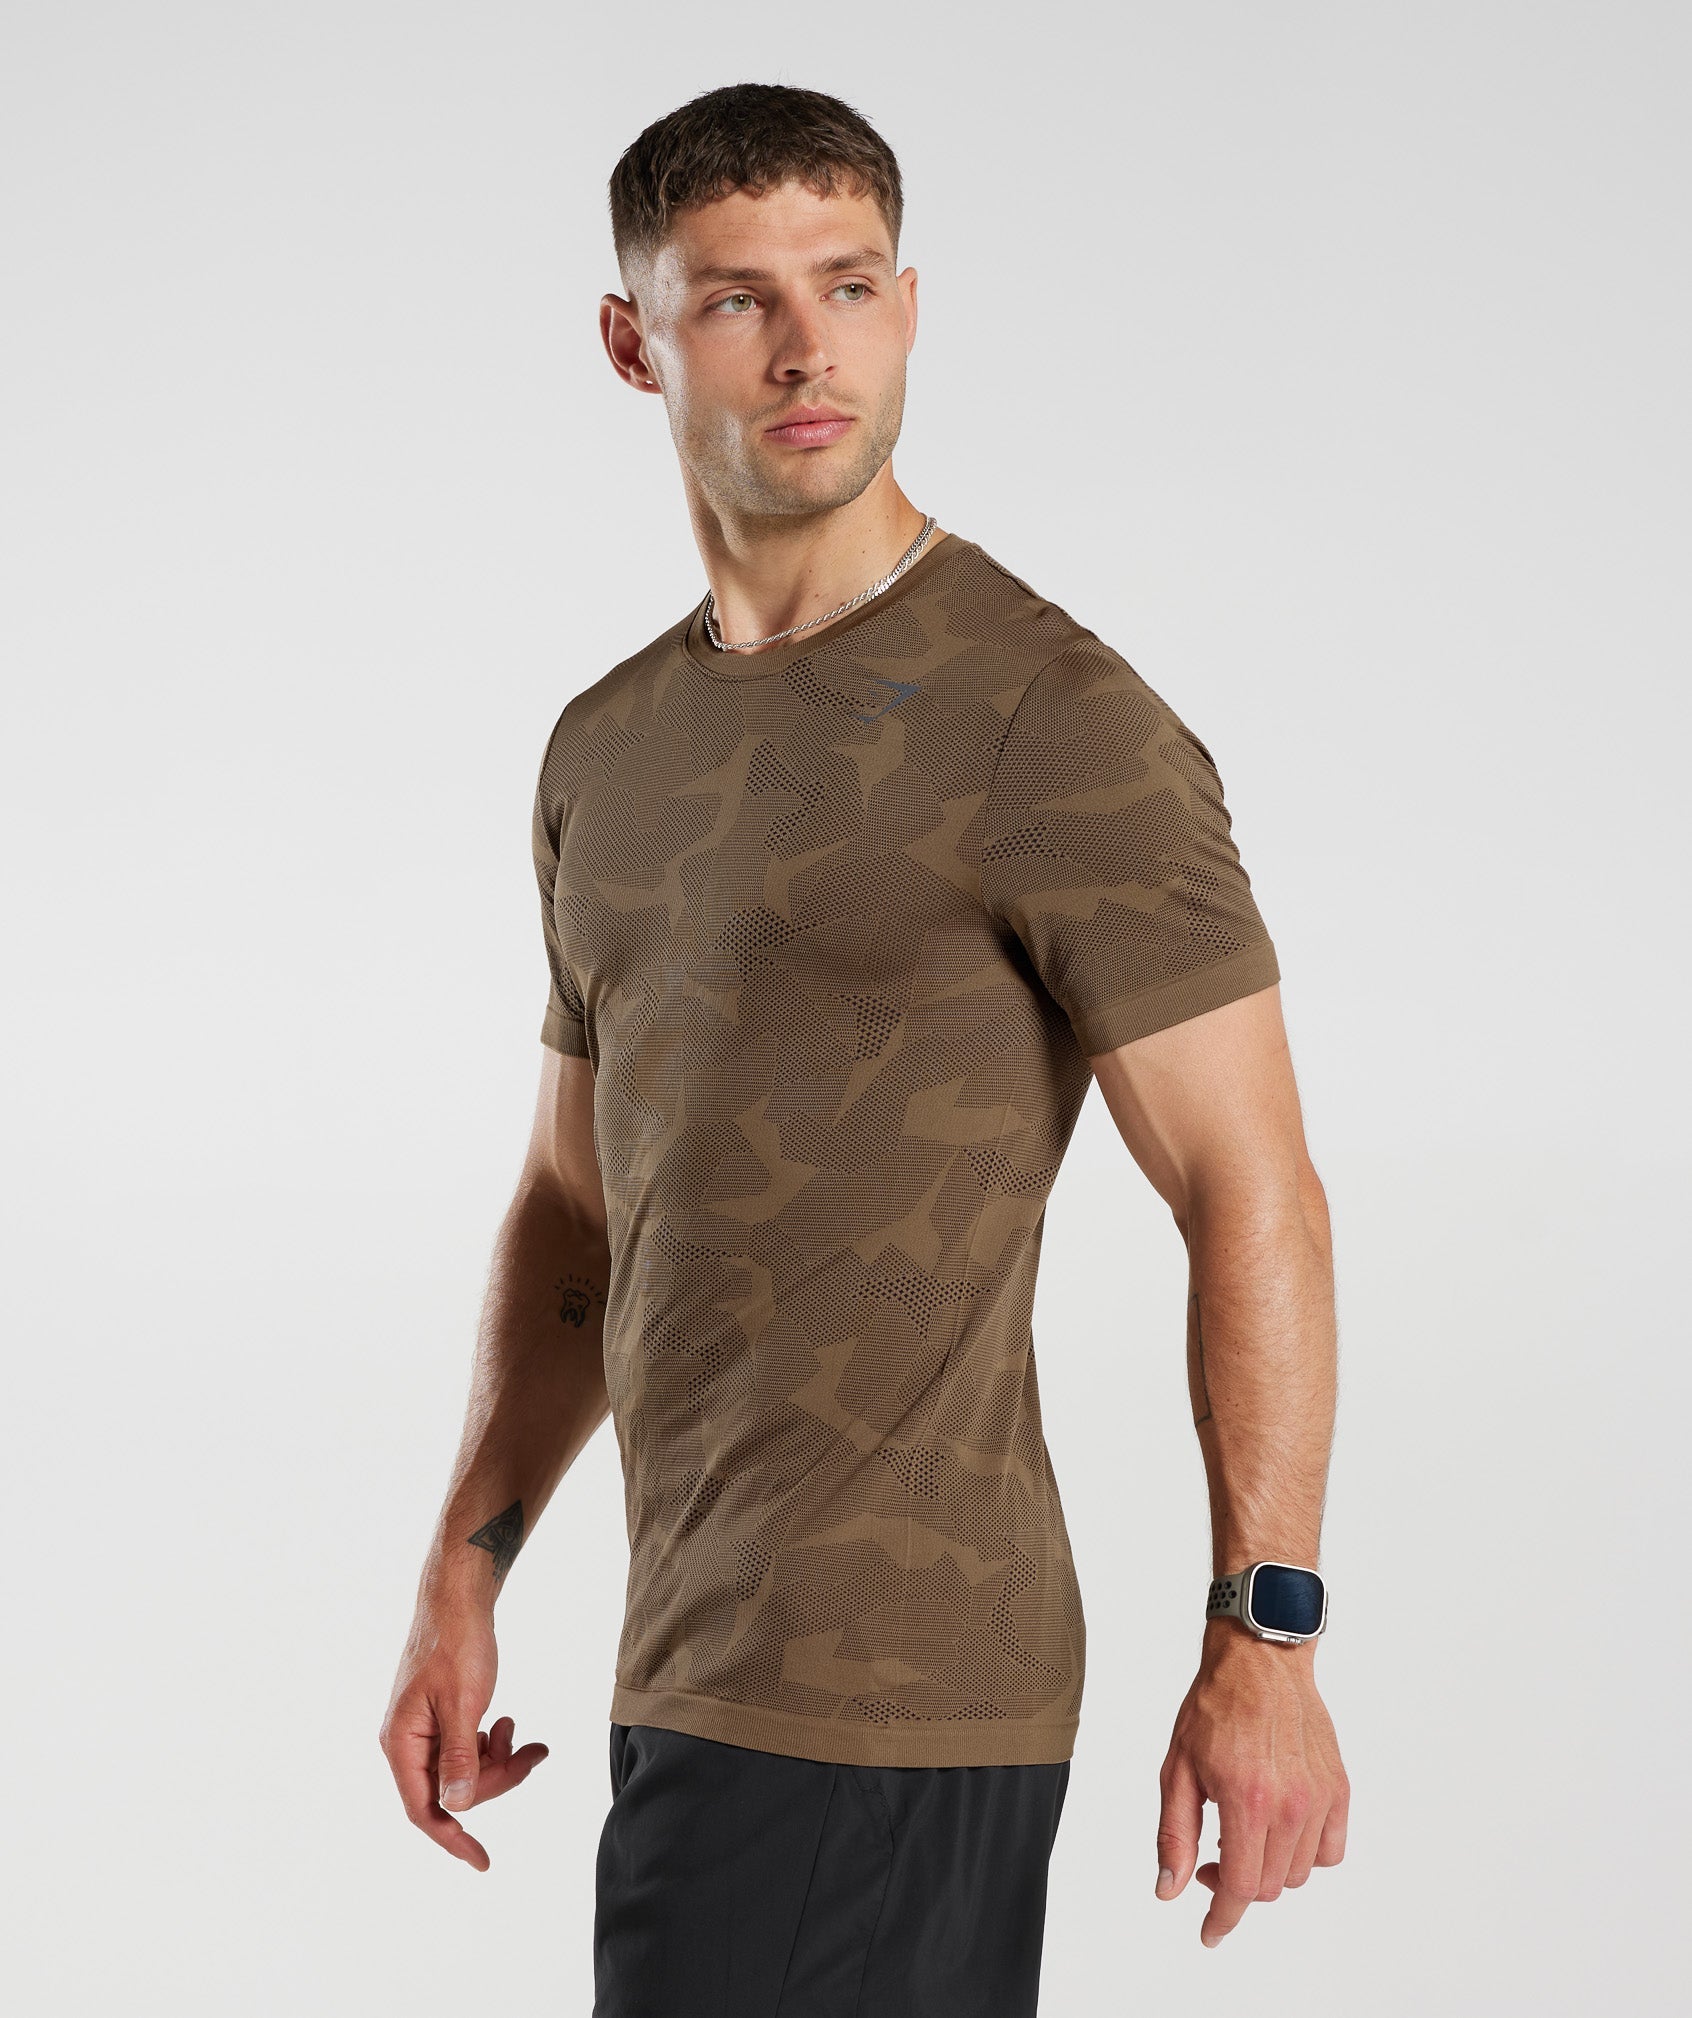 Sport Seamless T-Shirt in Fossil Brown/Black - view 3